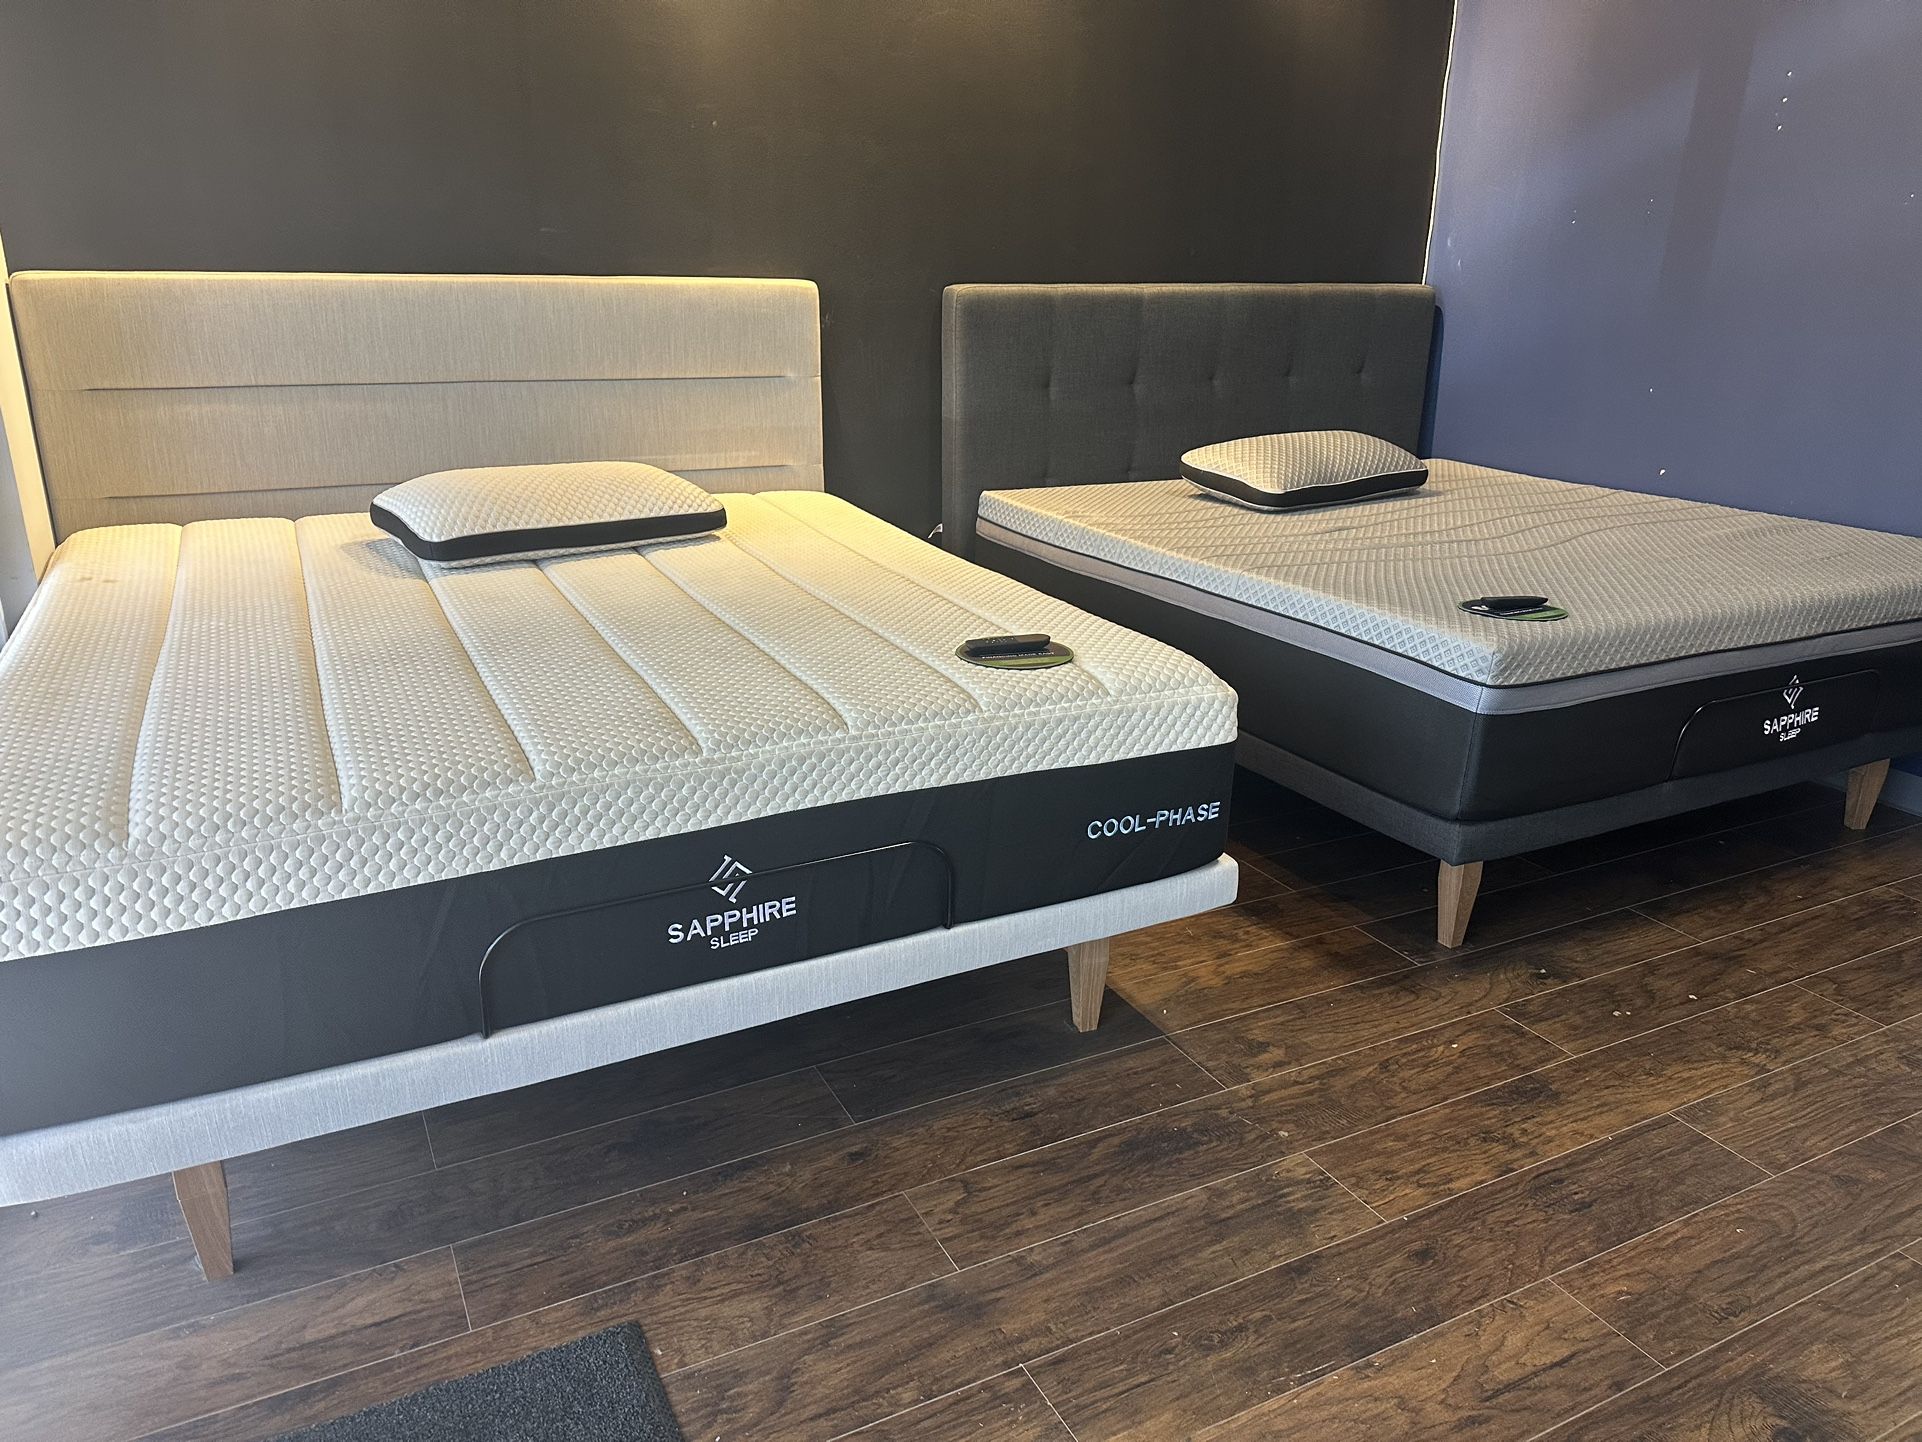 Get a Mattress Today for just $20 Out The Door (more info in details)